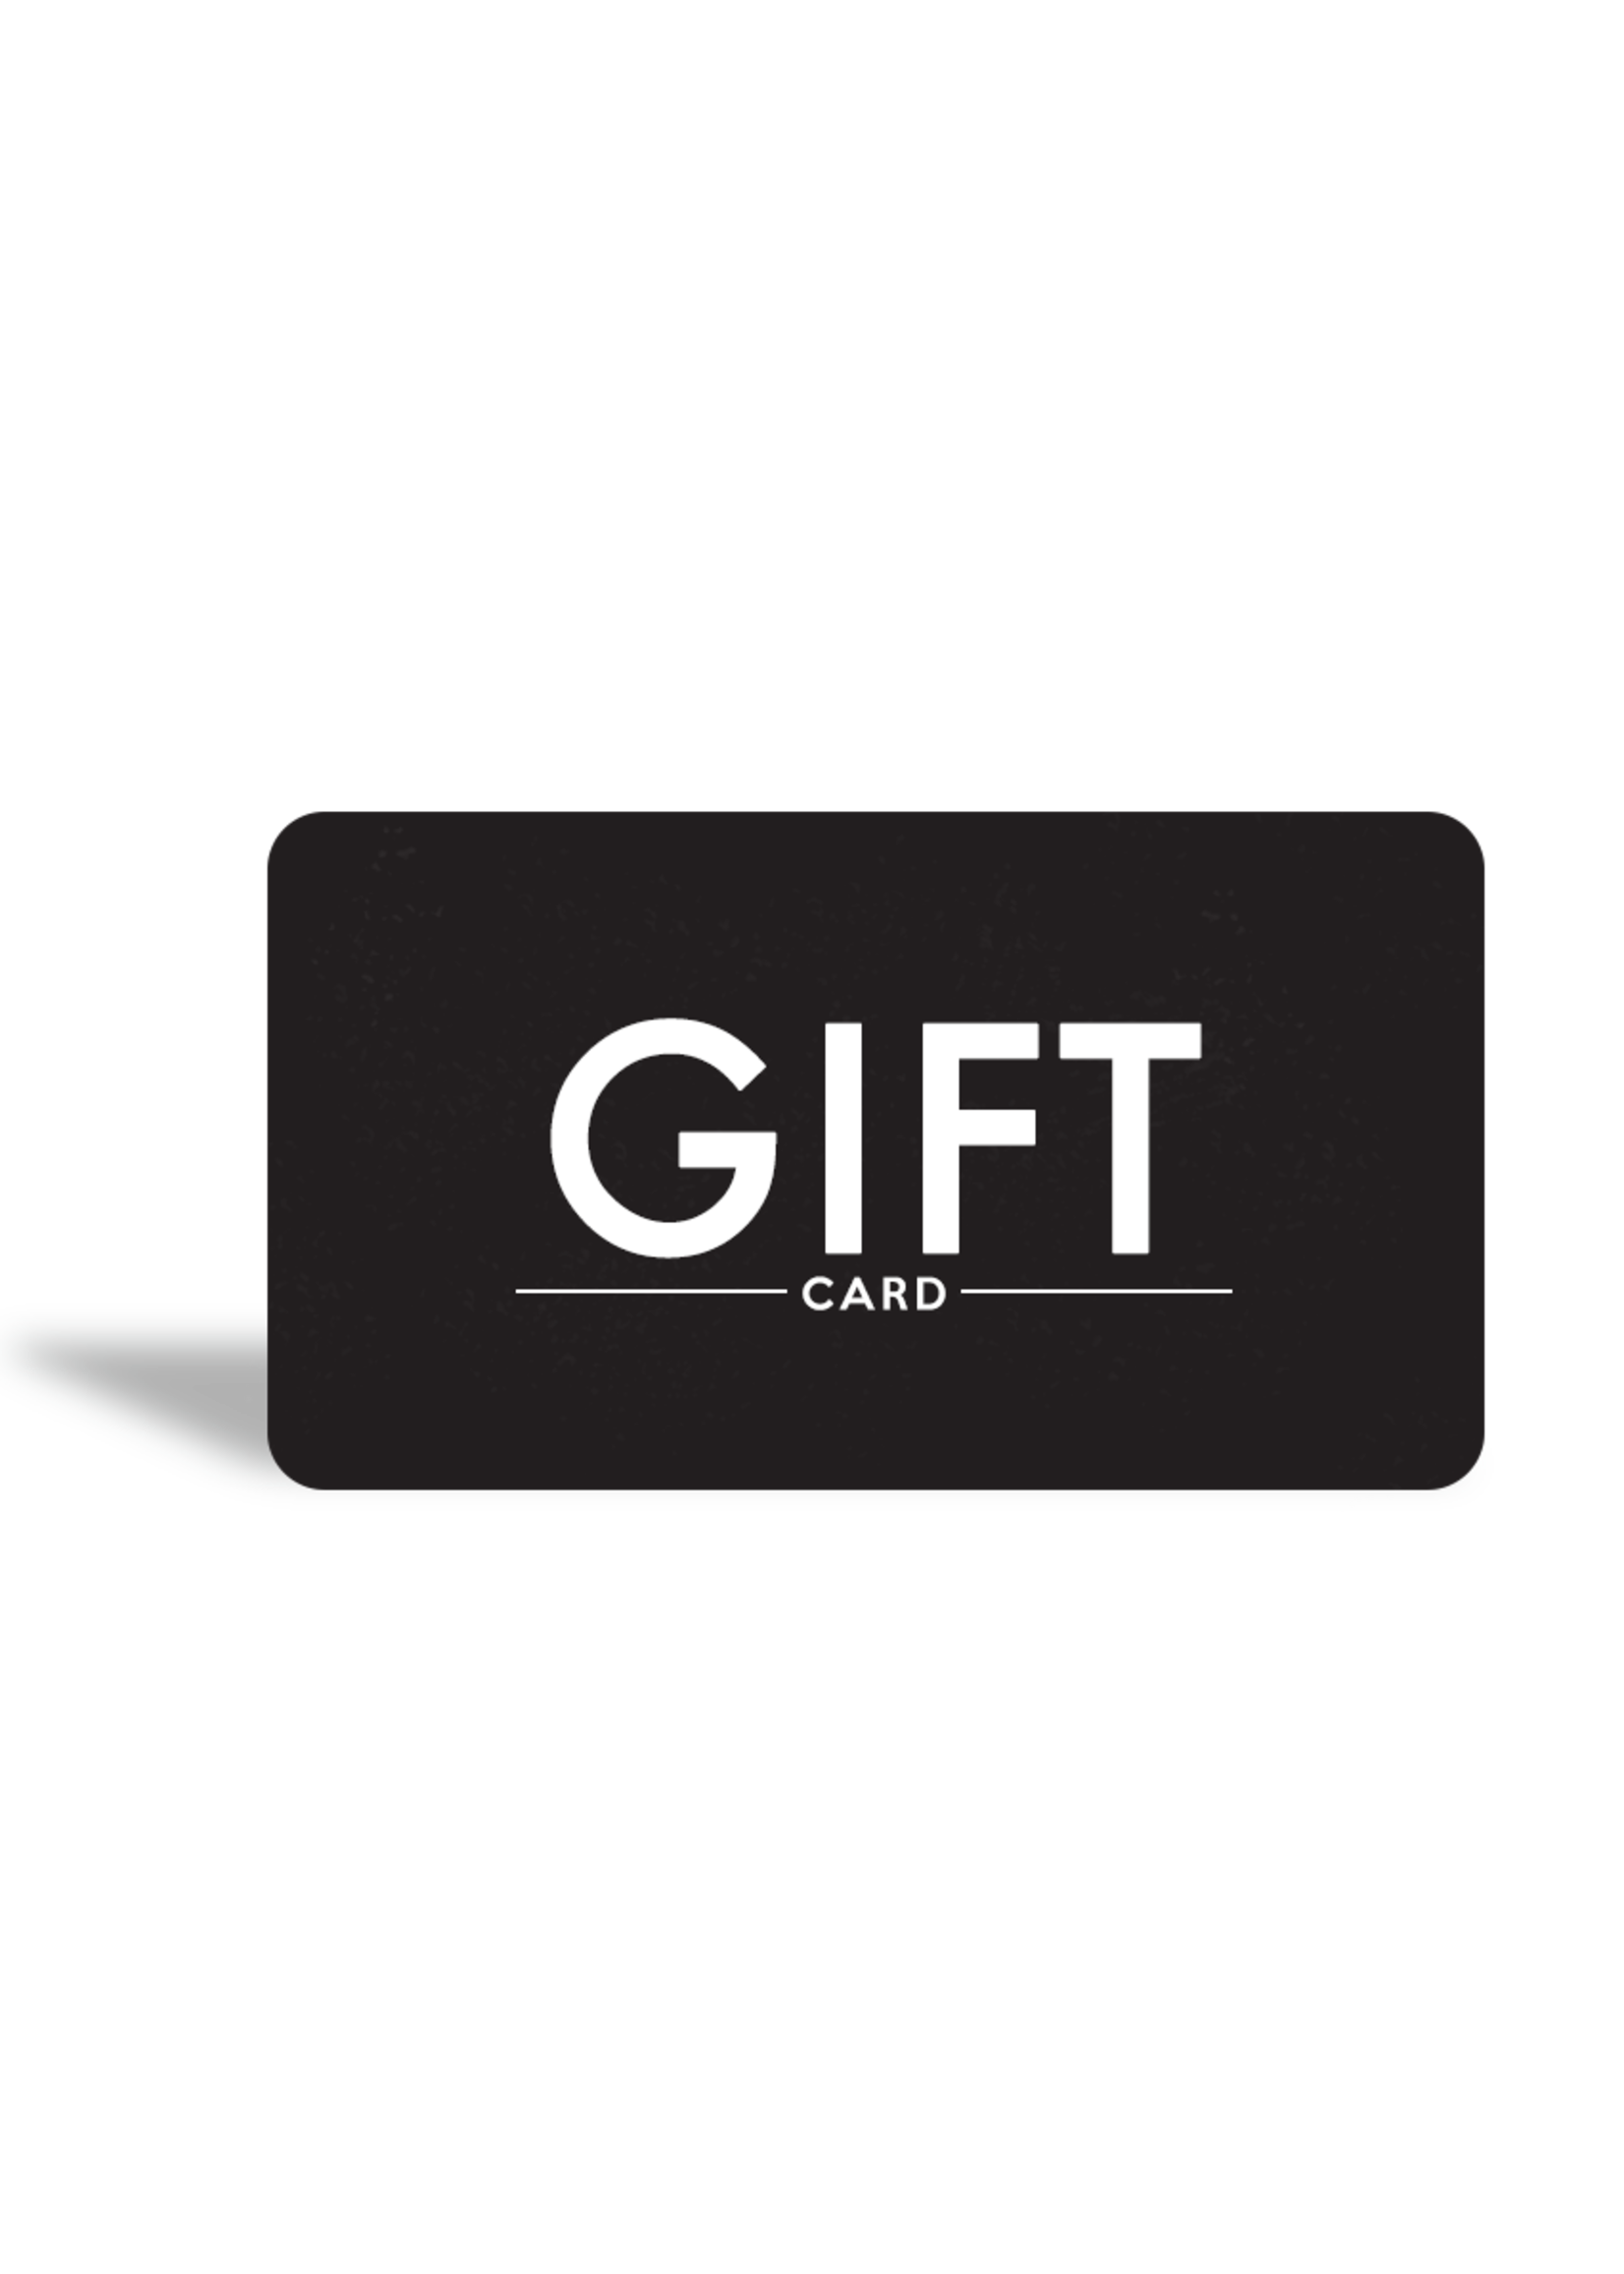 Gift card online - $50